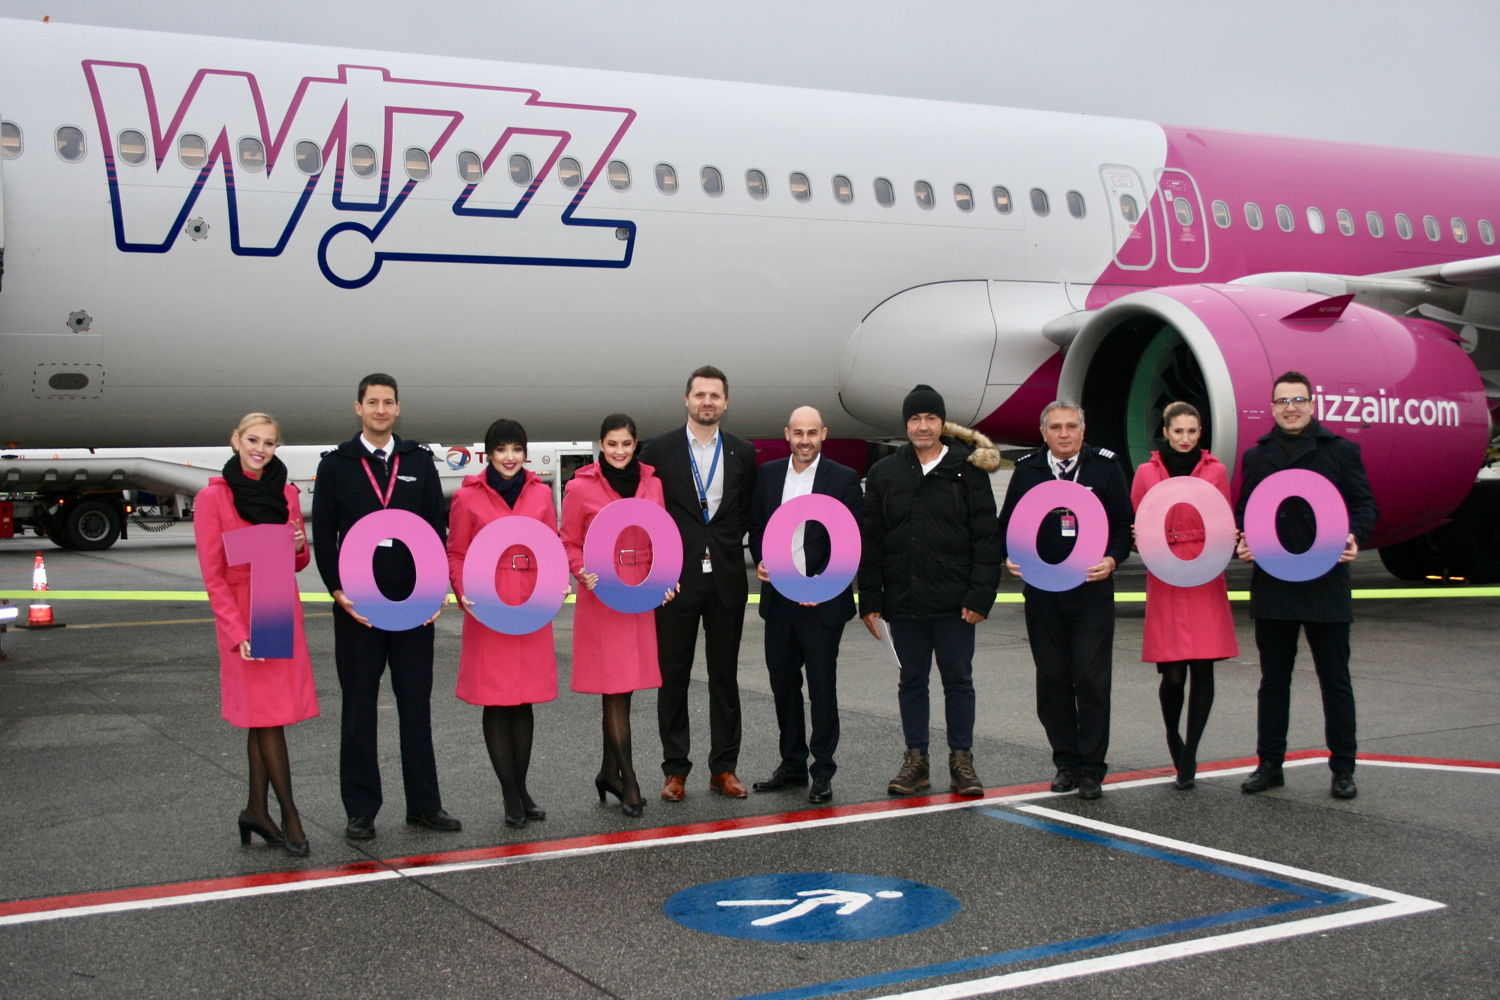 Dean Boljunovic, Head of Route Development Eindhoven Airport, Andras Rado, Corporate Communications Manager Wizz Air, and the lucky 10 millionth passenger, together with the crew of the Budapest-Eindhoven flight this morning